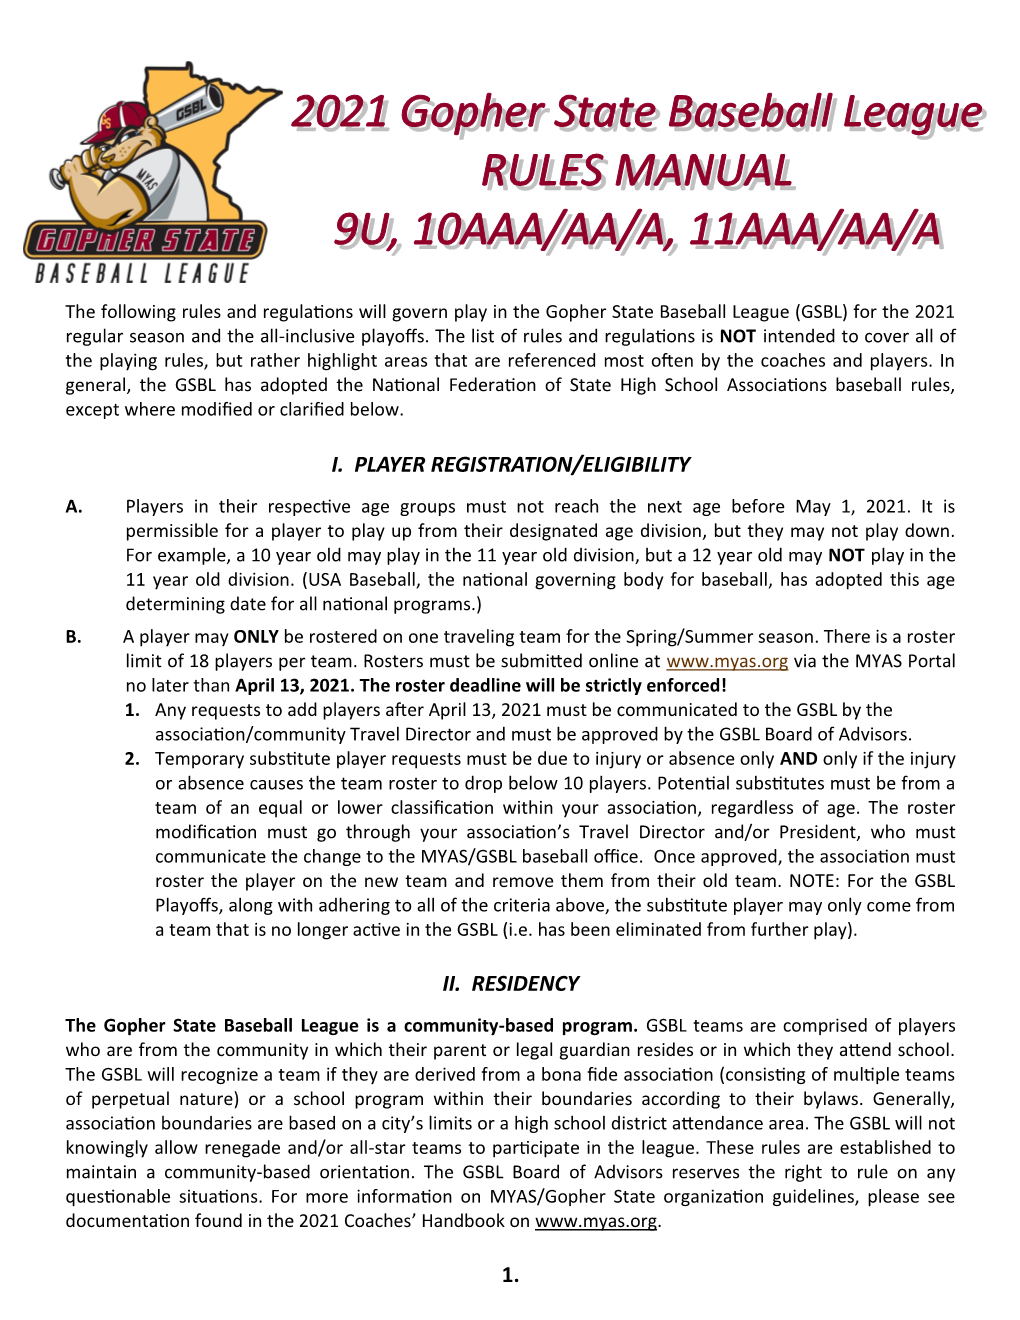 The Following Rules and Regulations Will Govern Play in the Gopher